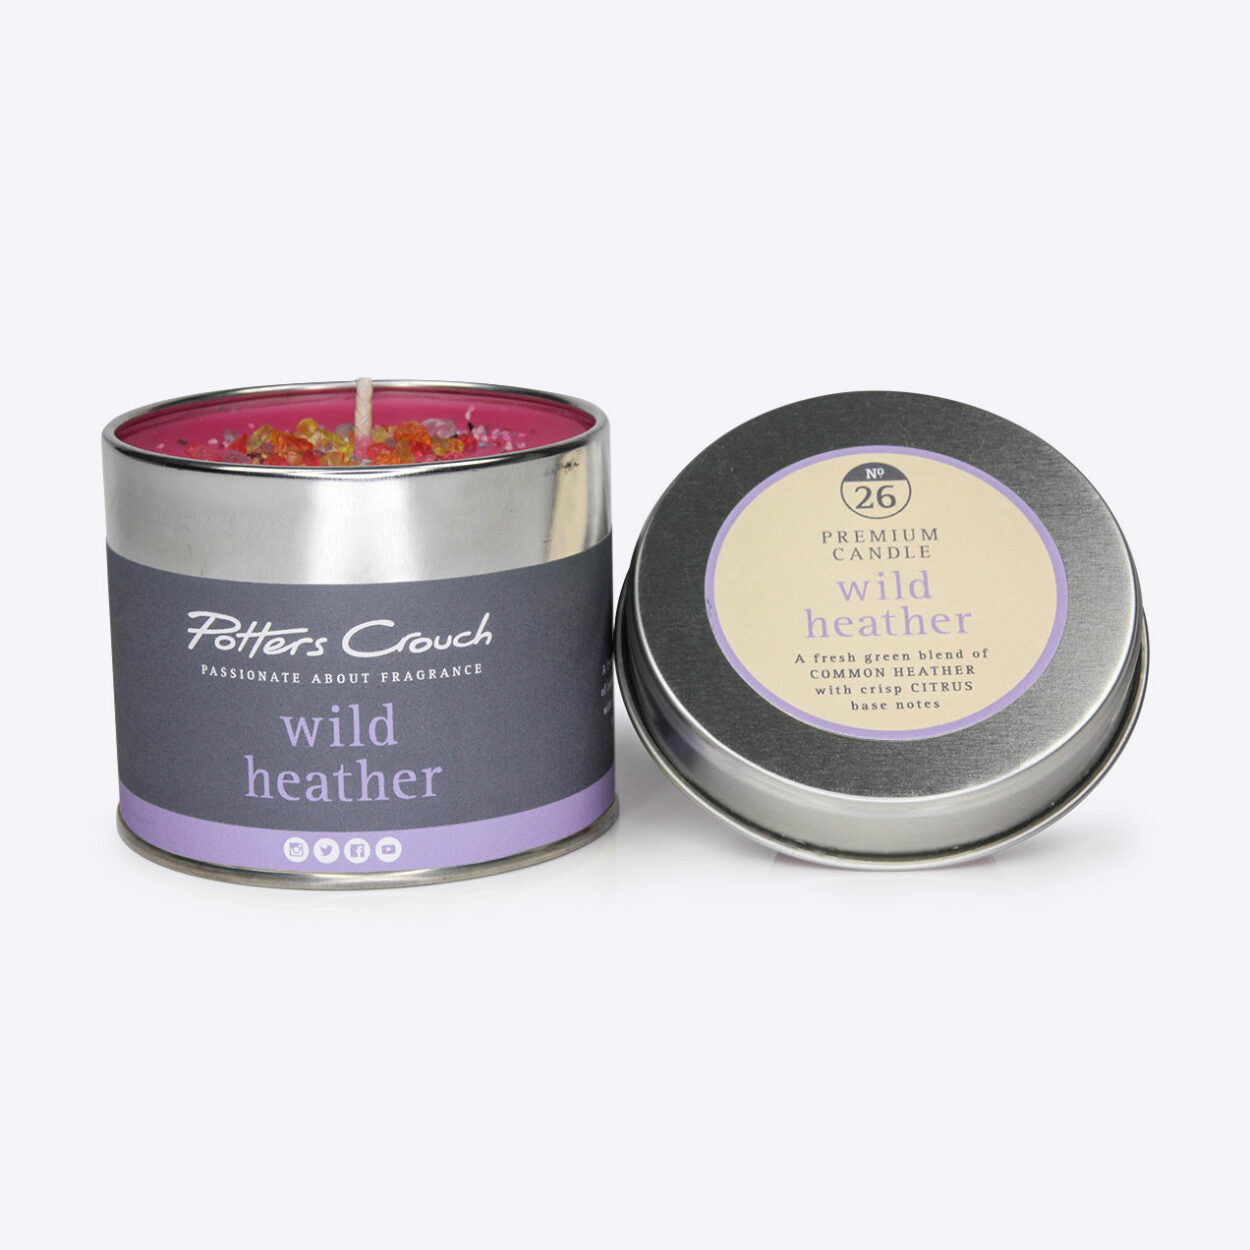 Potters Crouch Wild Heather Scented Candle in a Tin